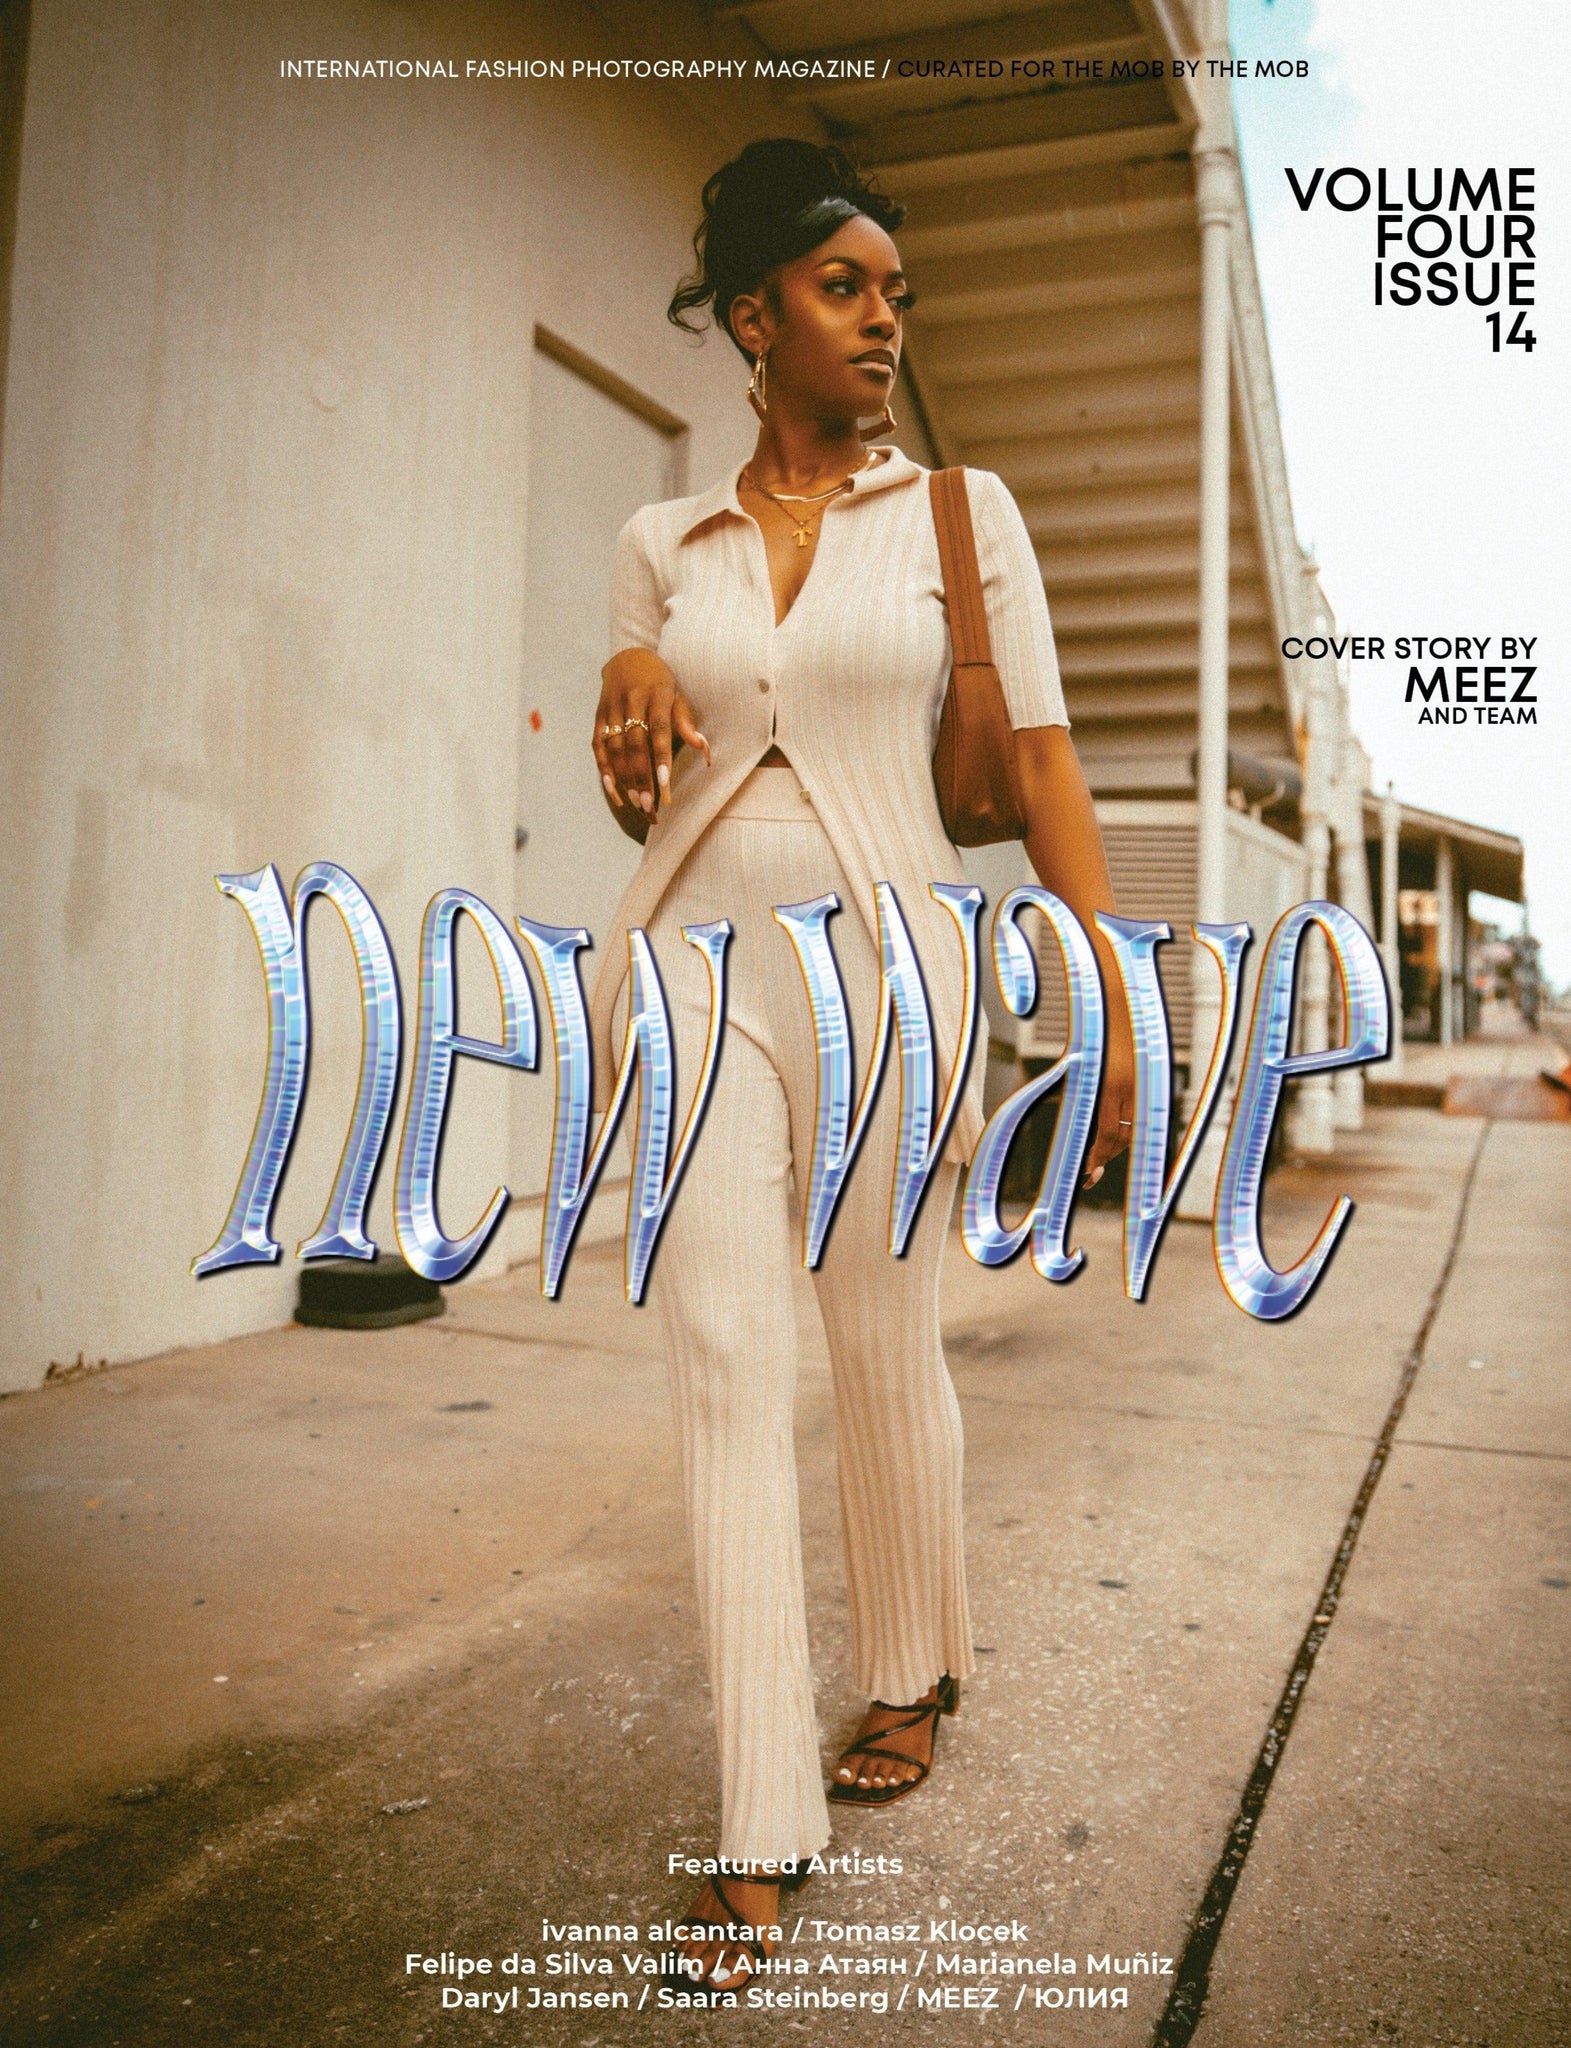 NEW WAVE | VOLUME FOUR | ISSUE #14 - Mob Journal